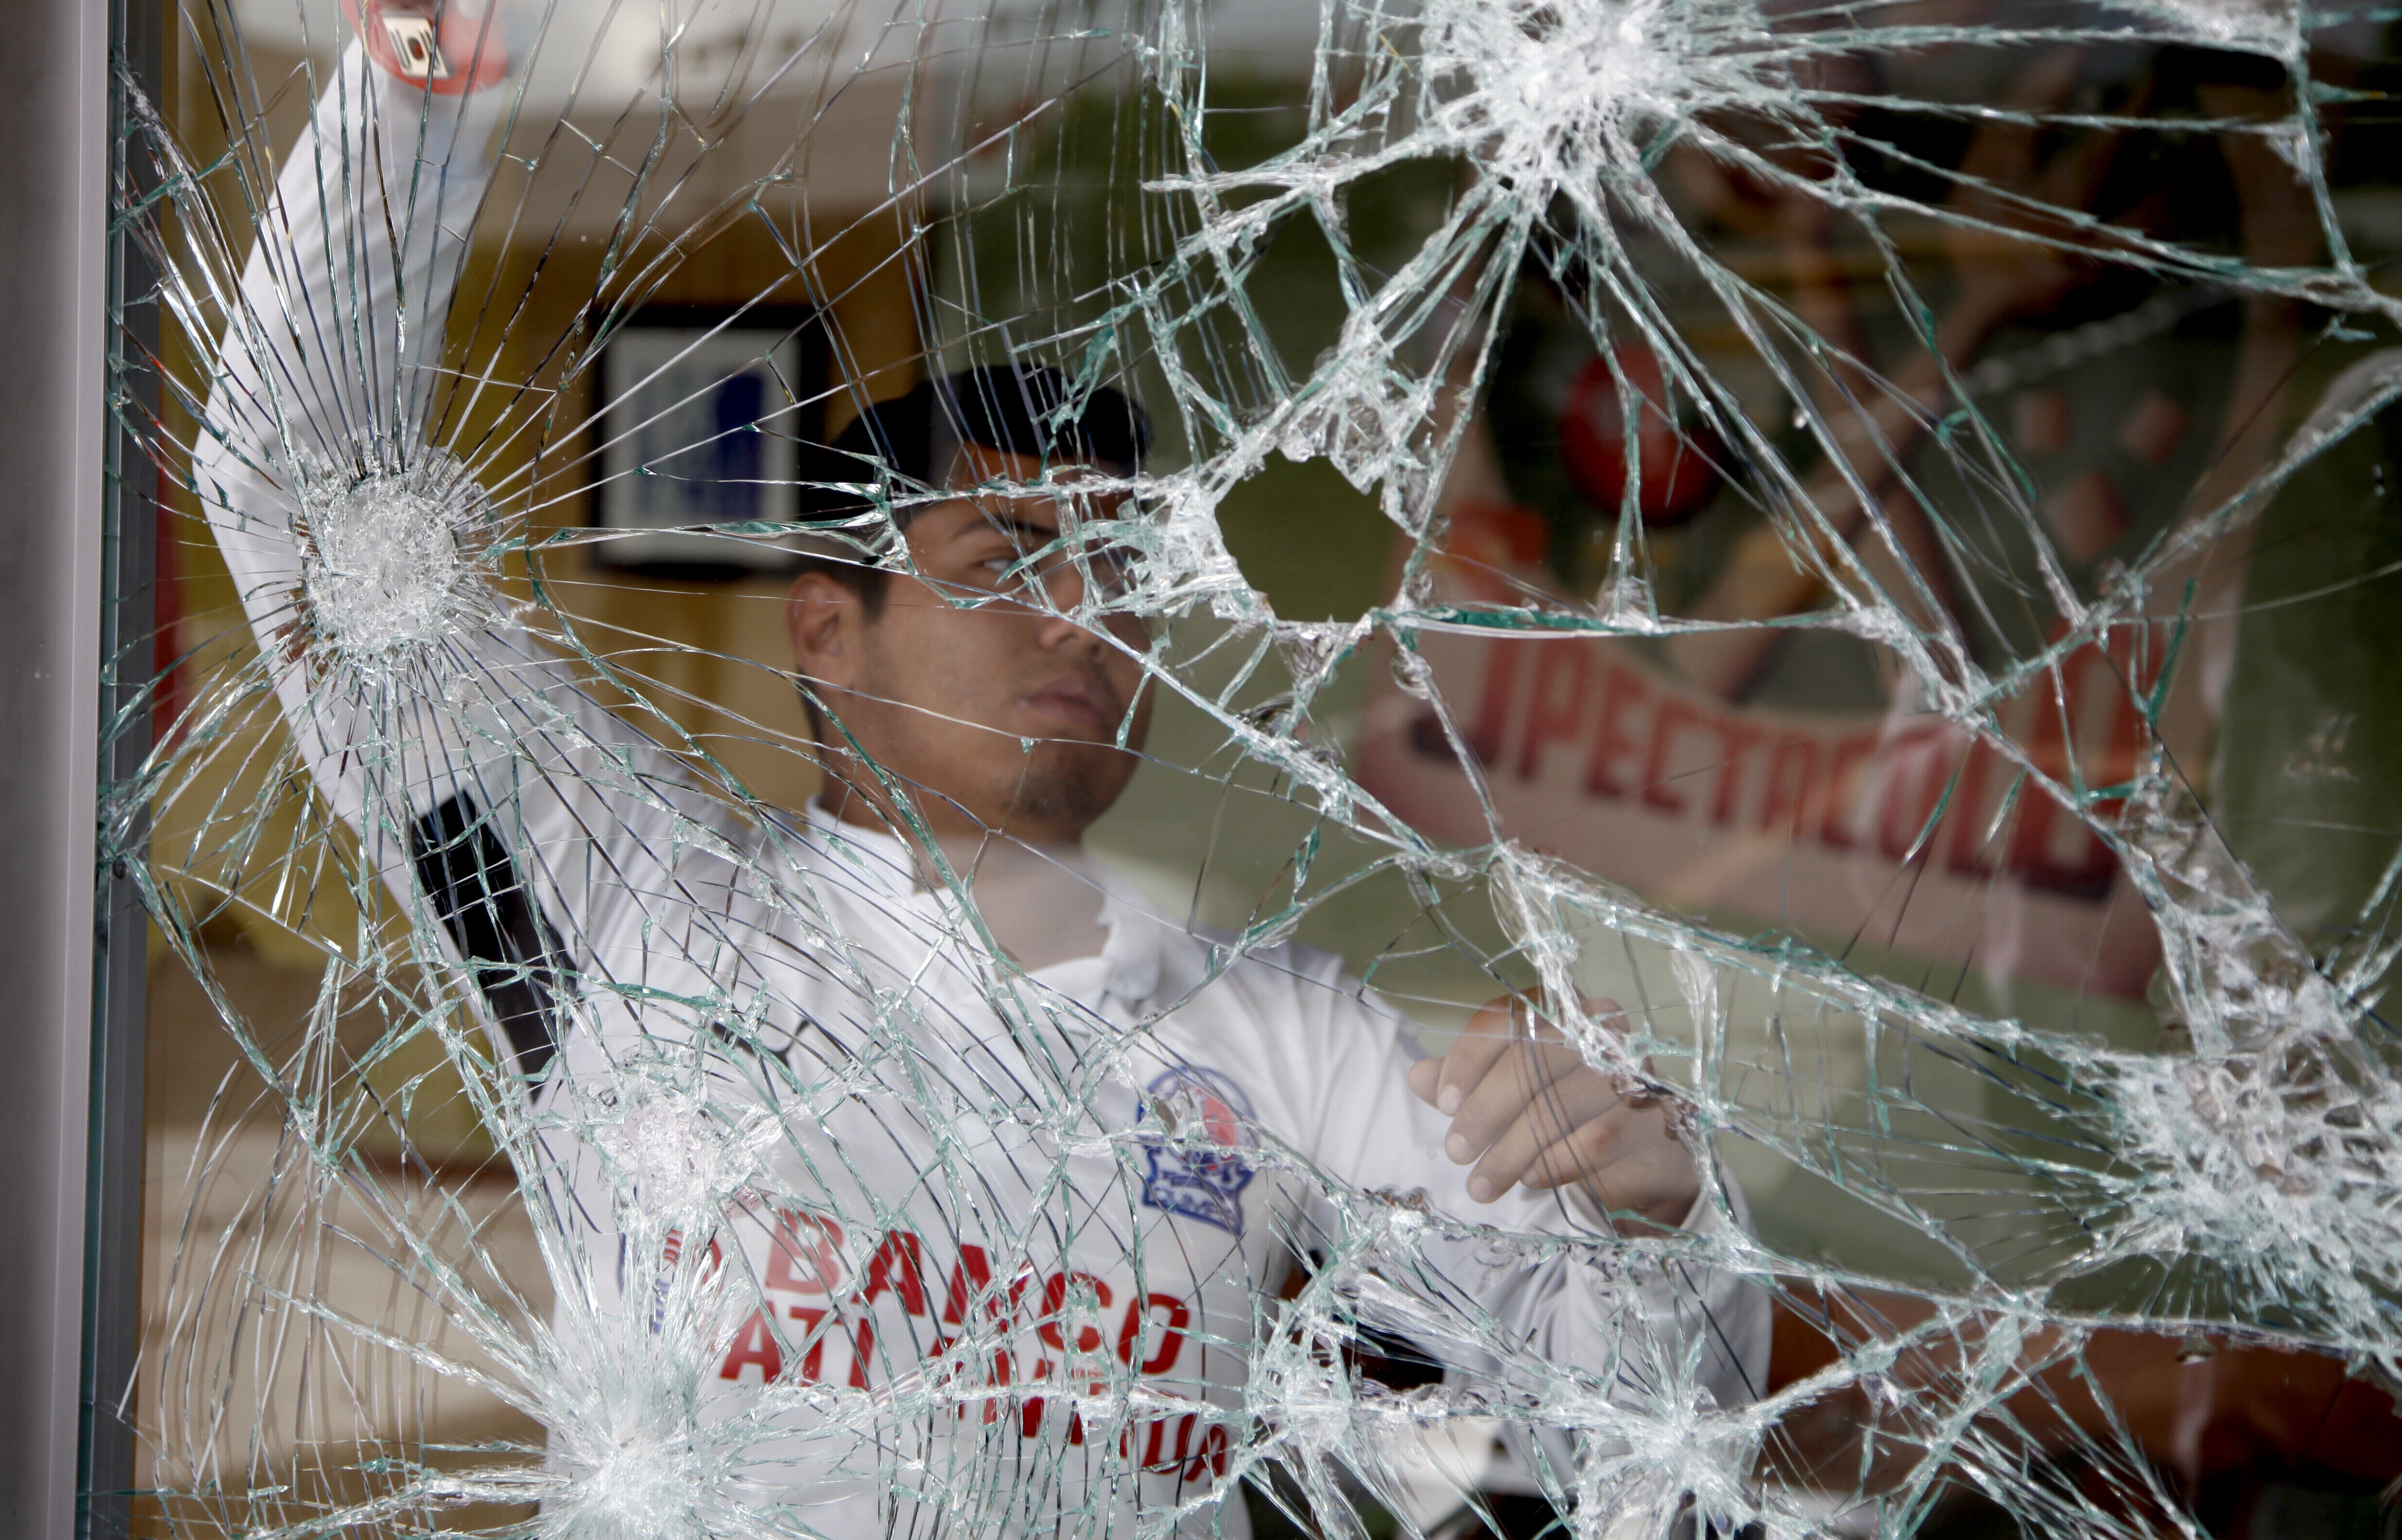 A worker of a fast food restaurant stands behind a storefront window shattered by looters, in Tegucigalpa, Honduras, Friday, Dec. 1, 2017. Protests continue in Honduras Friday as incumbent President Juan Orlando Hernandez's lead for re-election continues to grow. (AP Photo/Fernando Antonio)